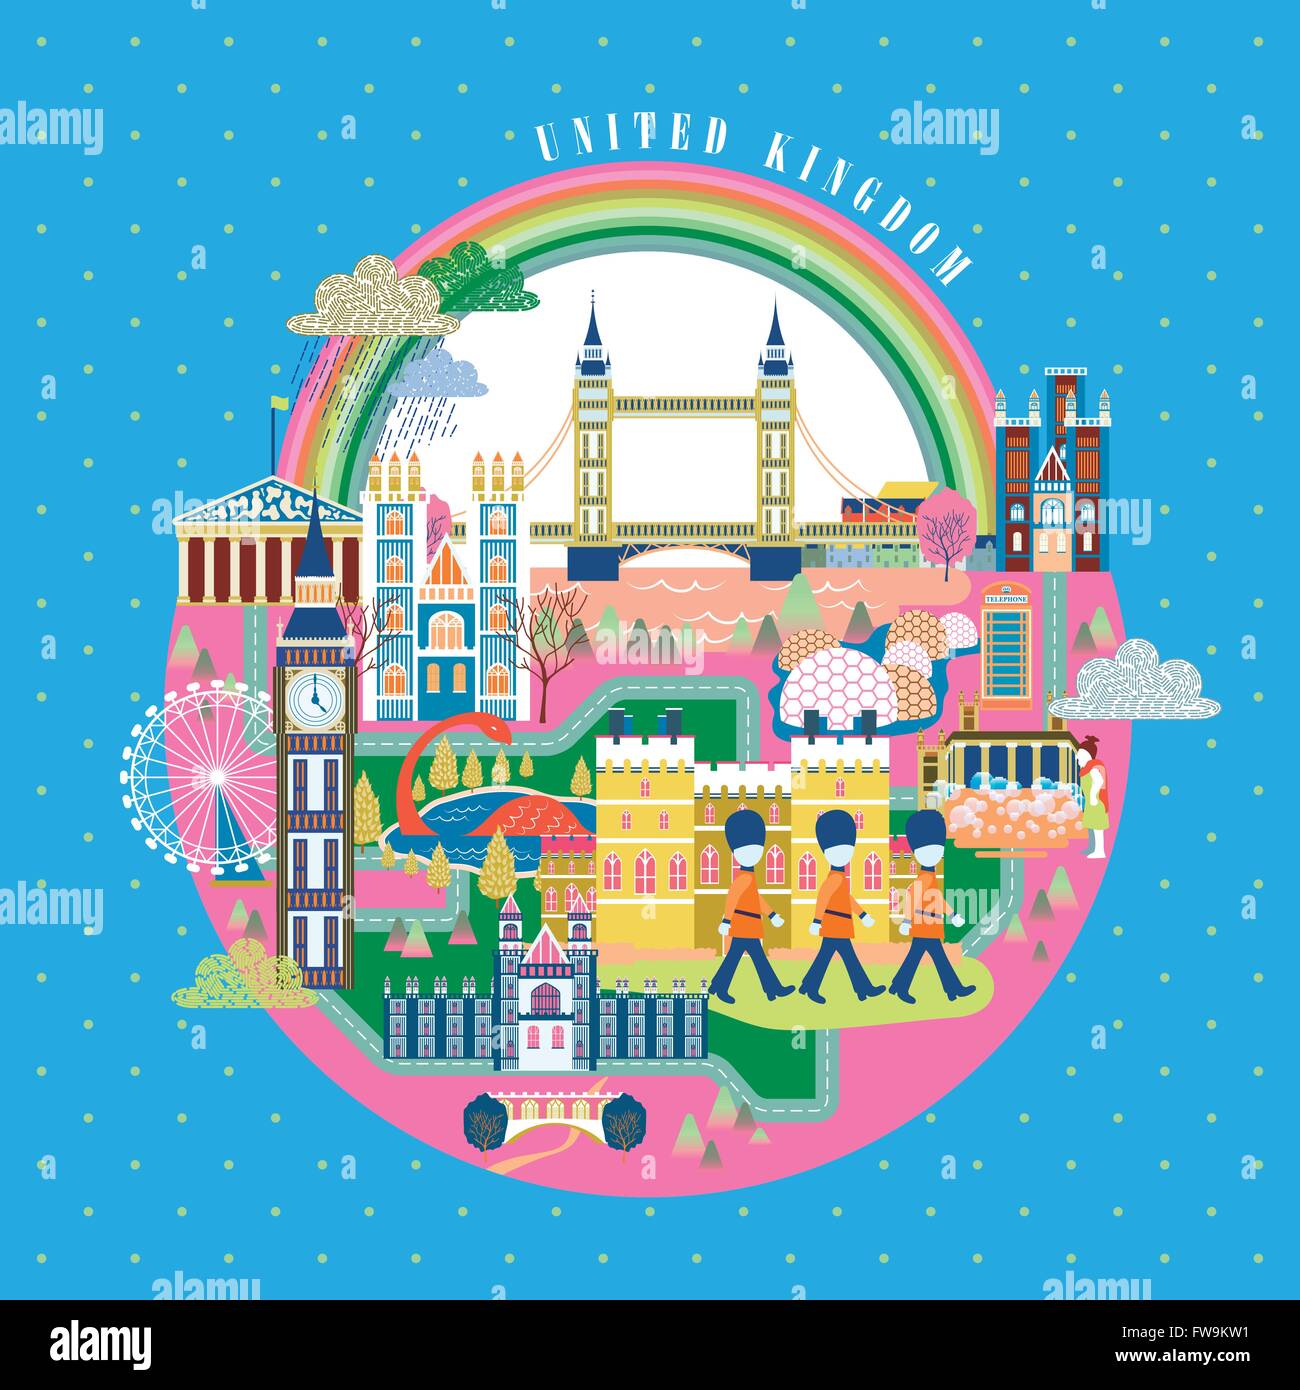 adorable United Kingdom travel poster design with attractions Stock Vector